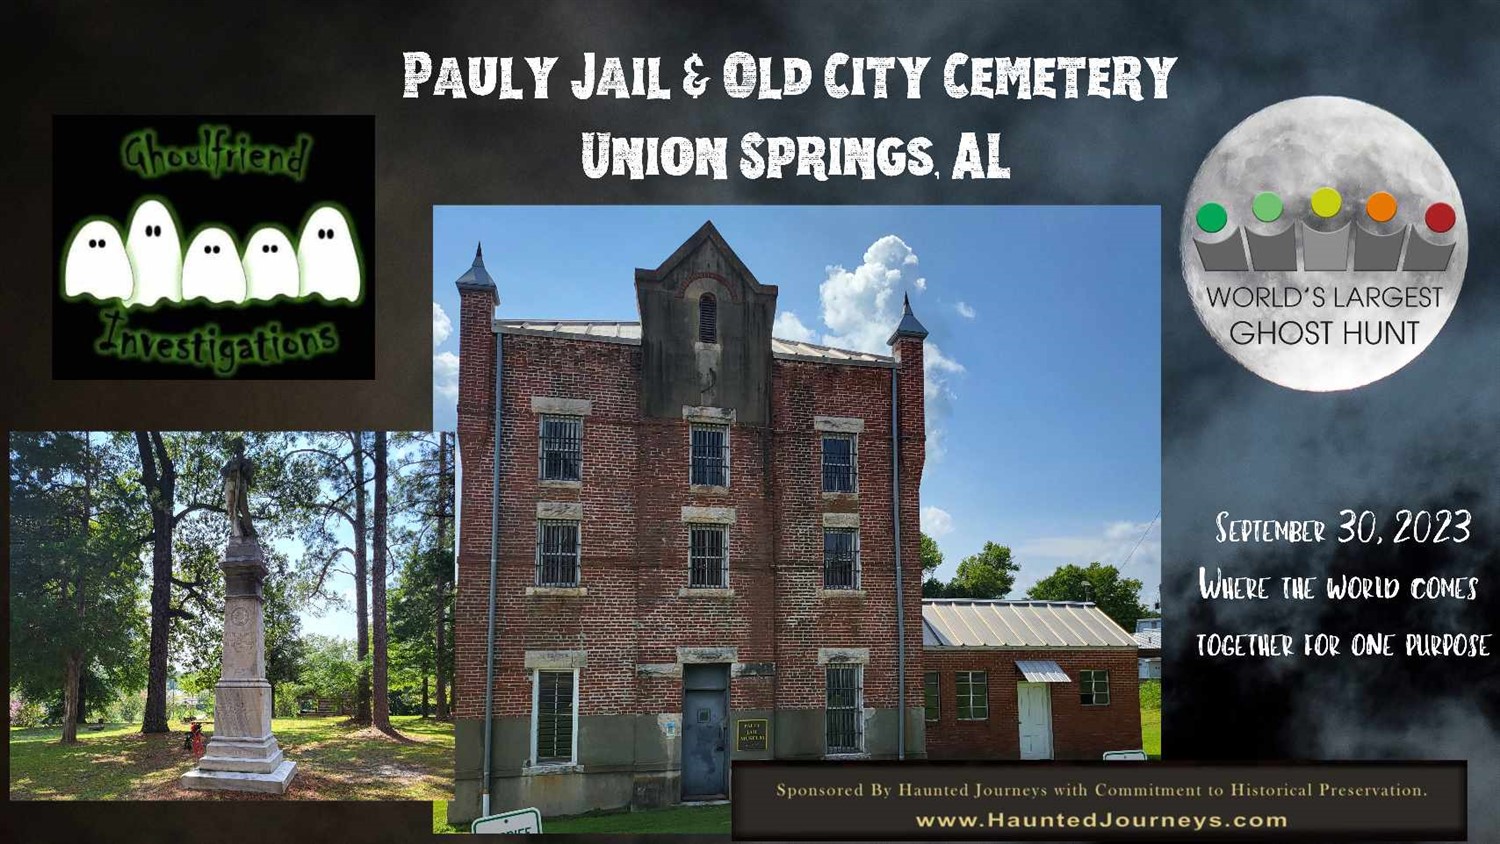 World's Largest Ghost Hunt 2023 Pauly Jail and Old City Cemetery on Sep 30, 19:00@Pauly Jail and Old City Cemetery - Buy tickets and Get information on Thriller Events thriller.events